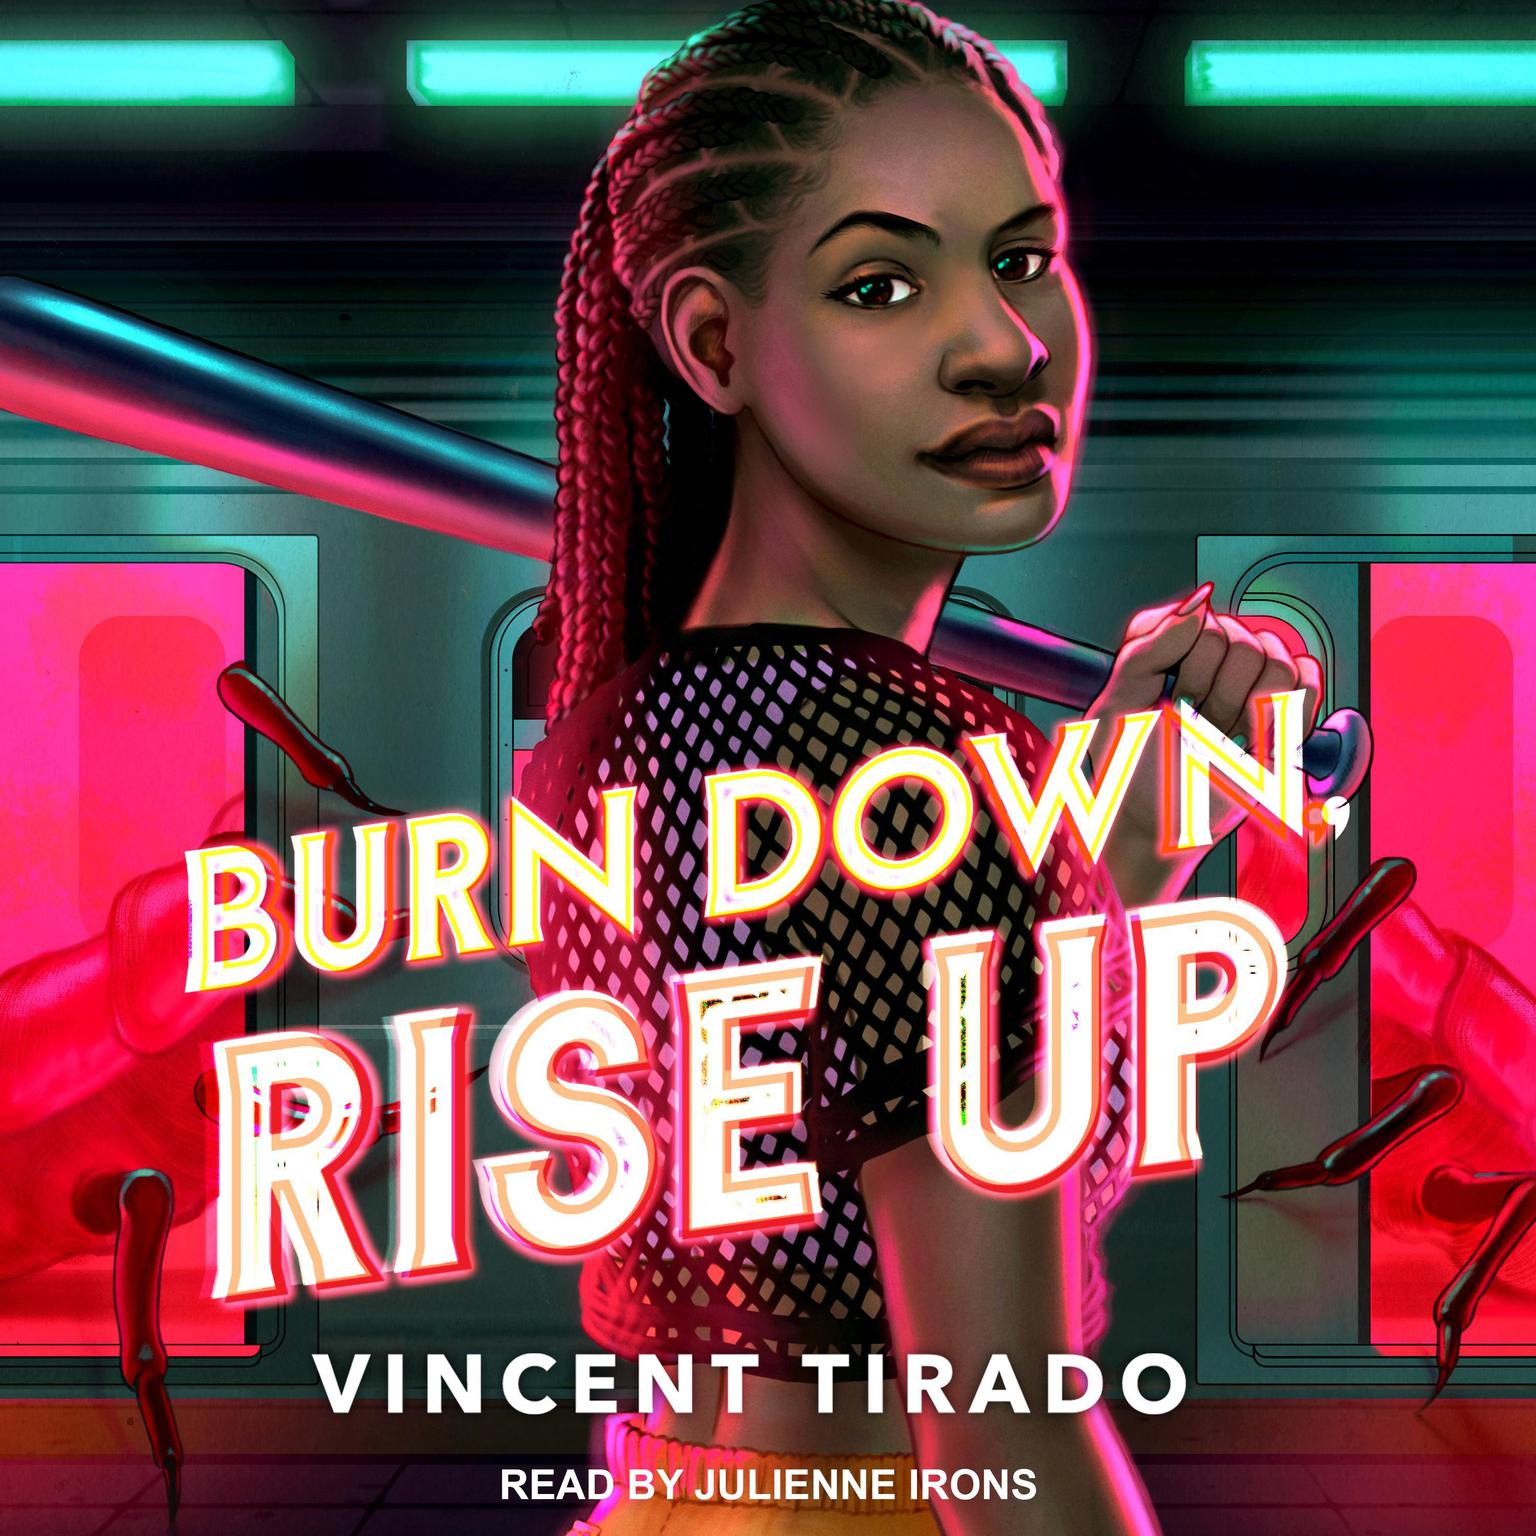 Burn Down, Rise Up Audiobook by Vincent Tirado — Listen Now